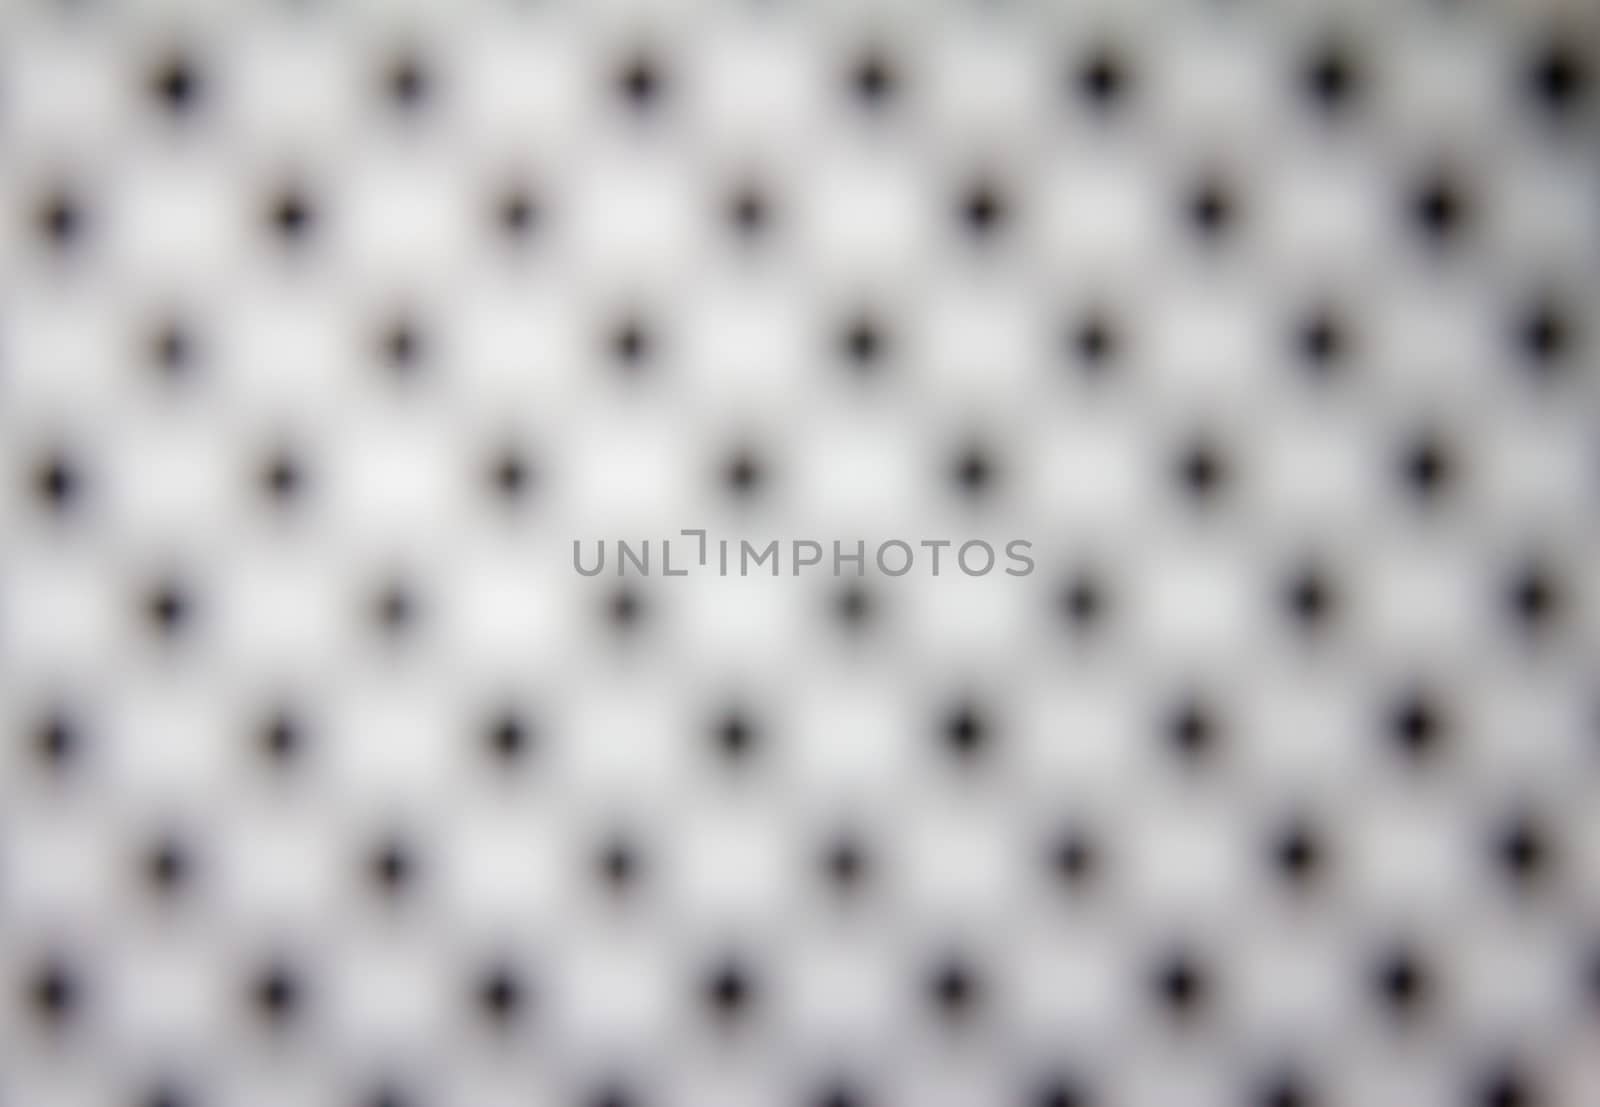 The Blur dot grid background of black and white